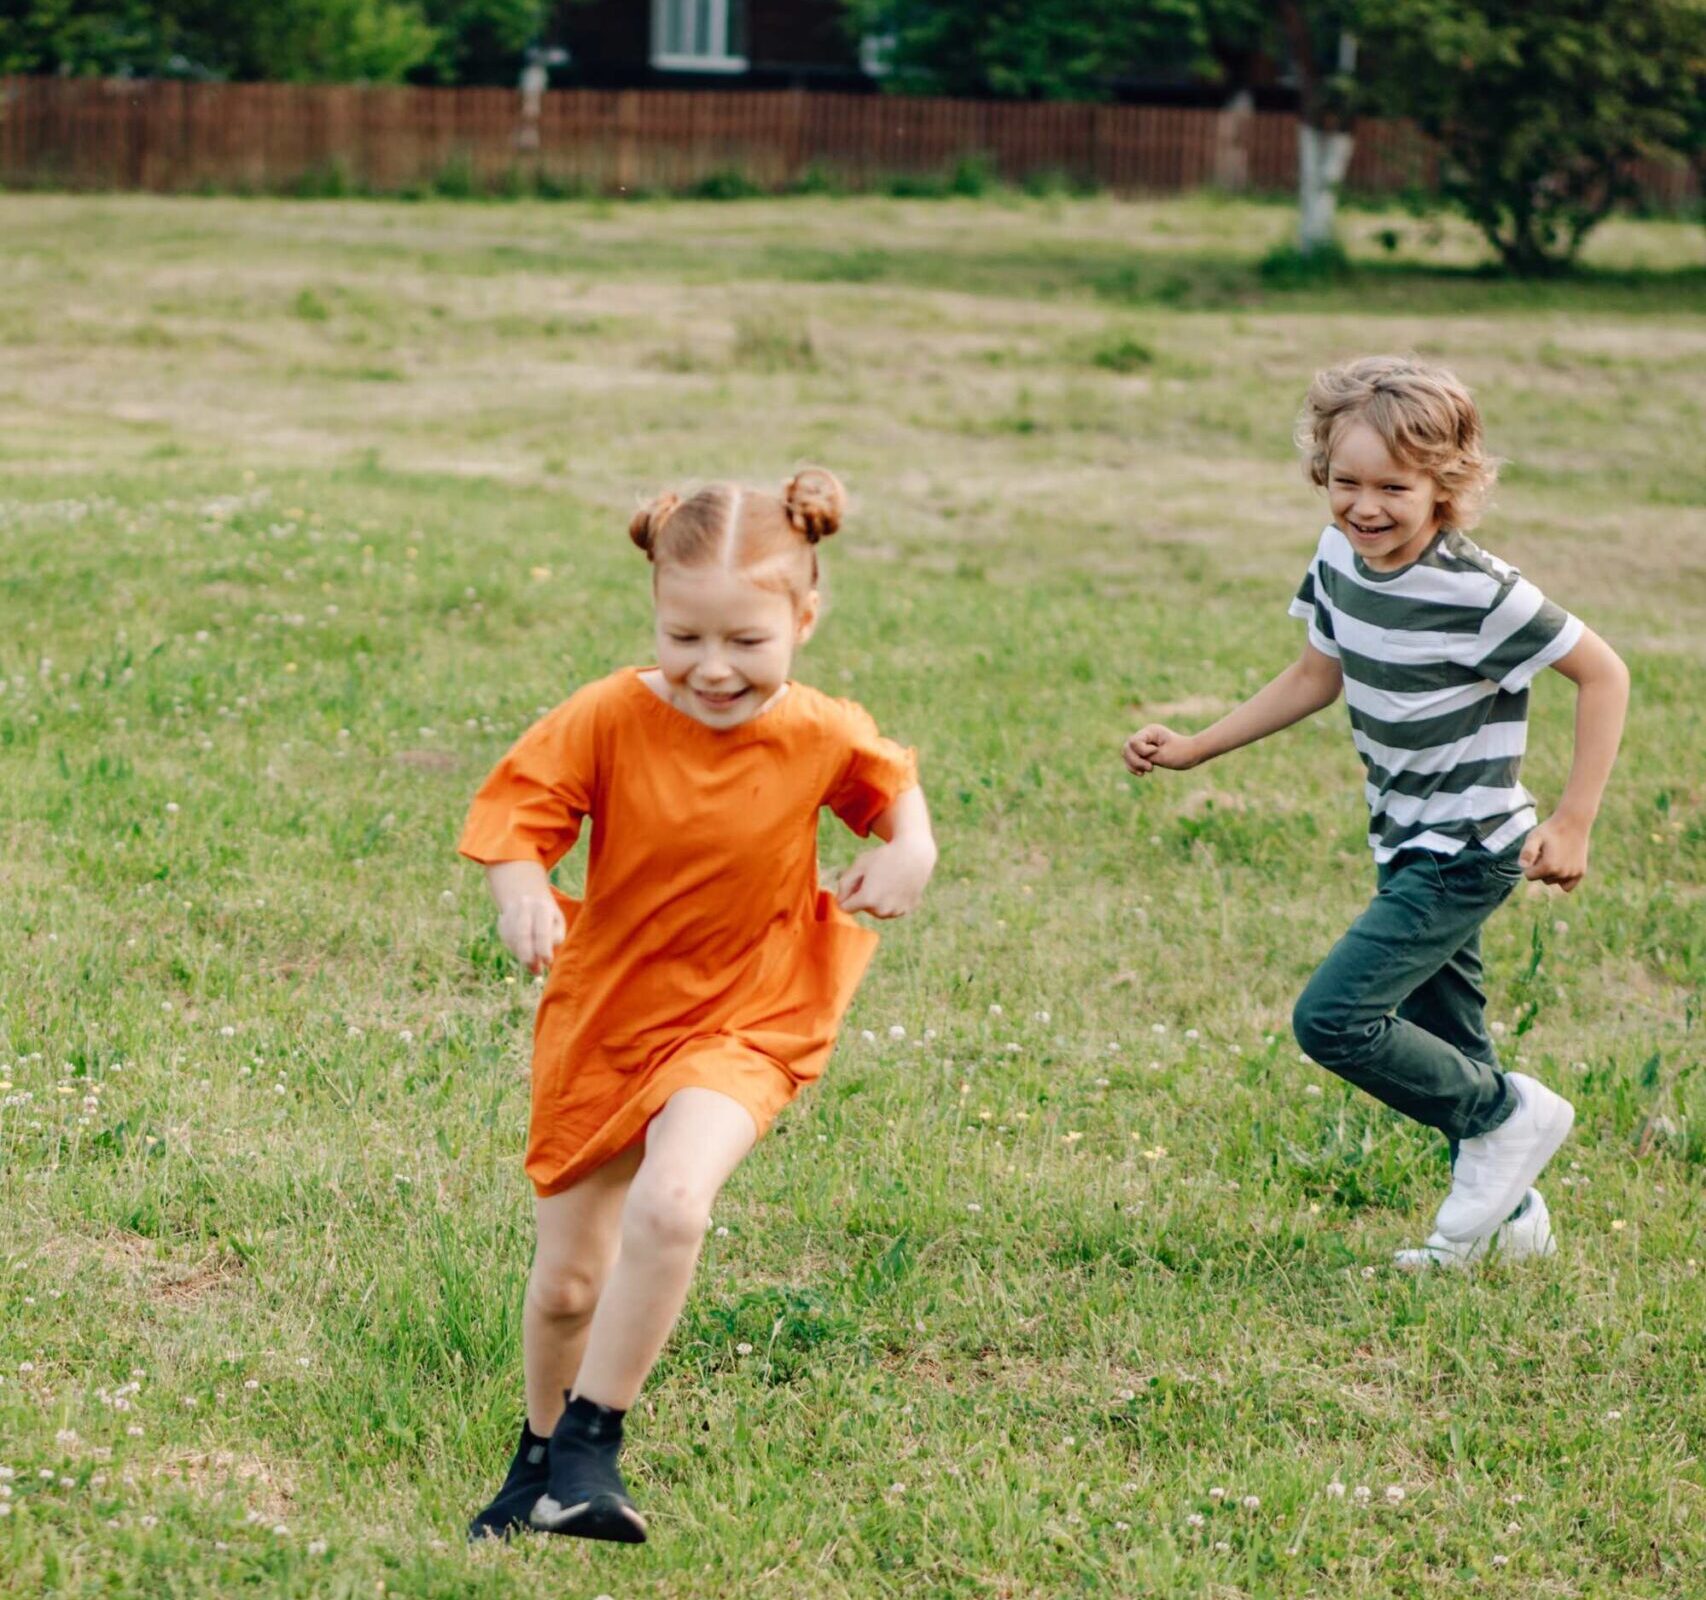 Photograph of a young girl and boy chasing each other in the grass.